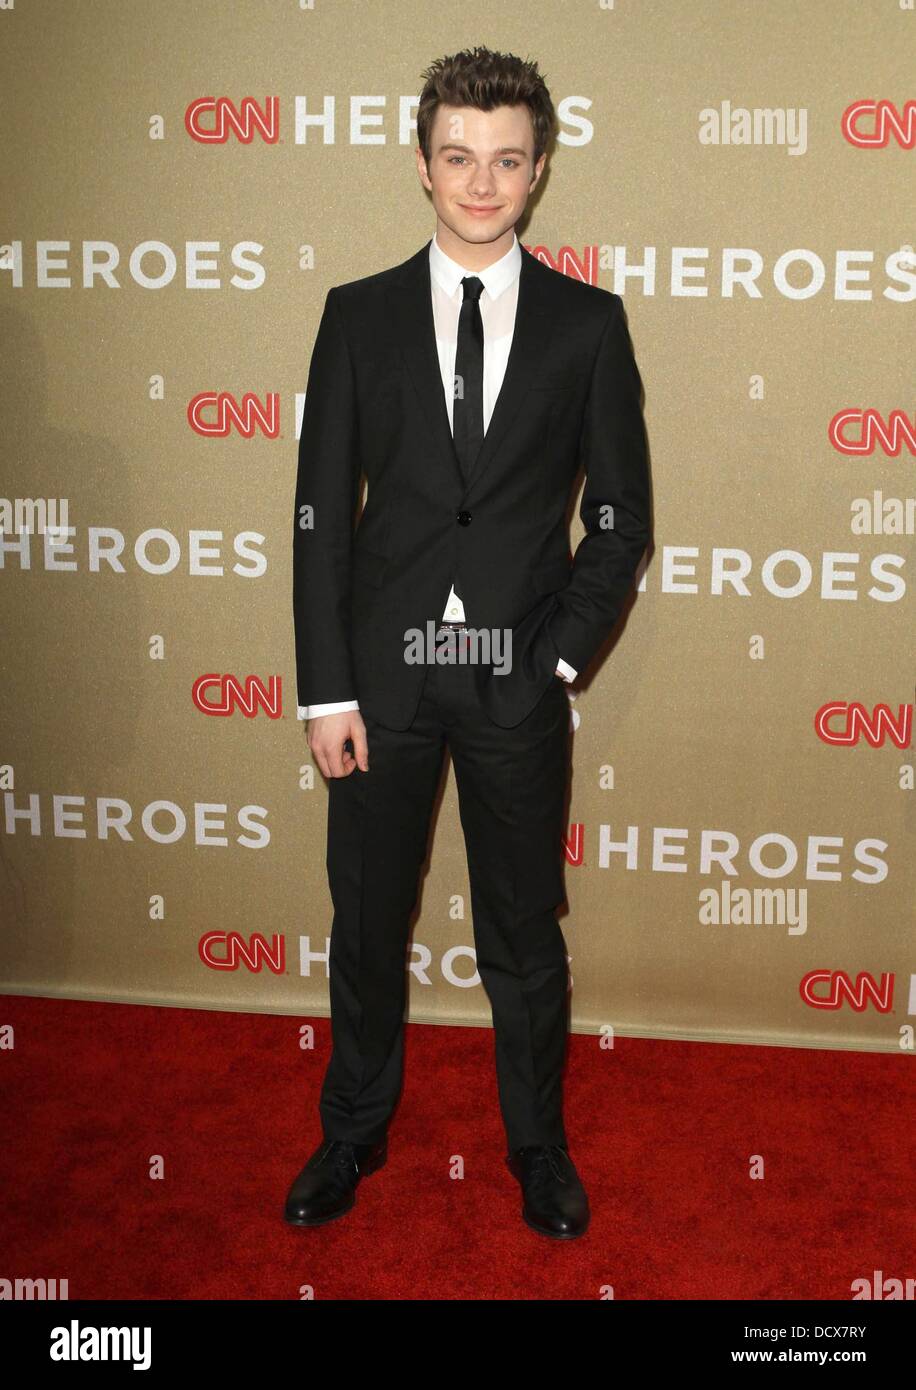 Chris Colfer at the CNN Heroes: An All-Star Tribute at The Shrine Auditorium. Los Angeles, California - 11.12.11 Stock Photo